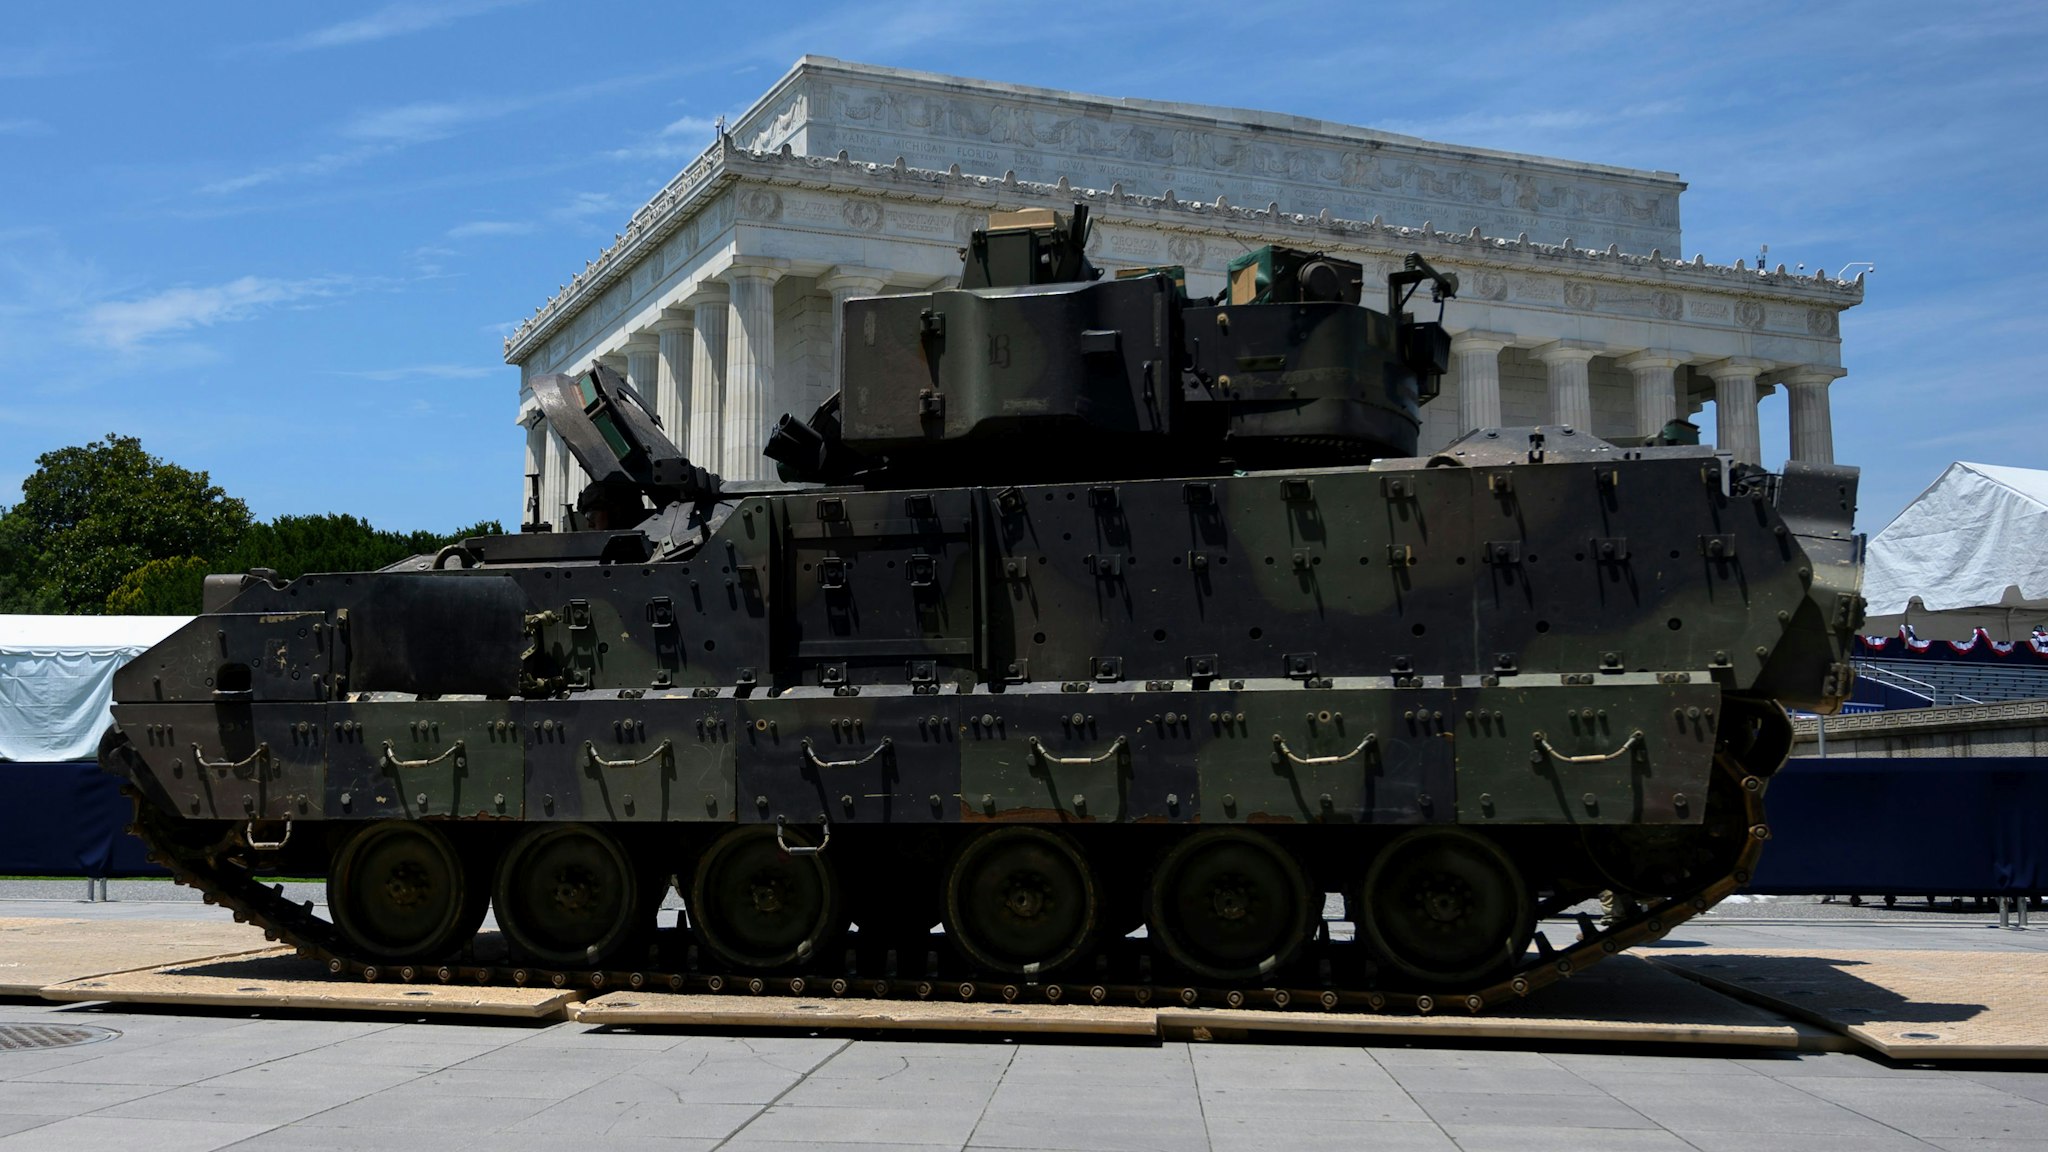 A Bradley Fighting Vehicle is parked as preparations are made for the "Salute to America" Fourth of July event with US President Donald Trump at the Lincoln Memorial on the National Mall in Washington, DC, July 3, 2019, which will feature flyovers by the Blue Angels, an airplane used as Air Force One, as well as military demonstrations and a speech by Trump. (Photo by Andrew CABALLERO-REYNOLDS / AFP) (Photo credit should read ANDREW CABALLERO-REYNOLDS/AFP via Getty Images)